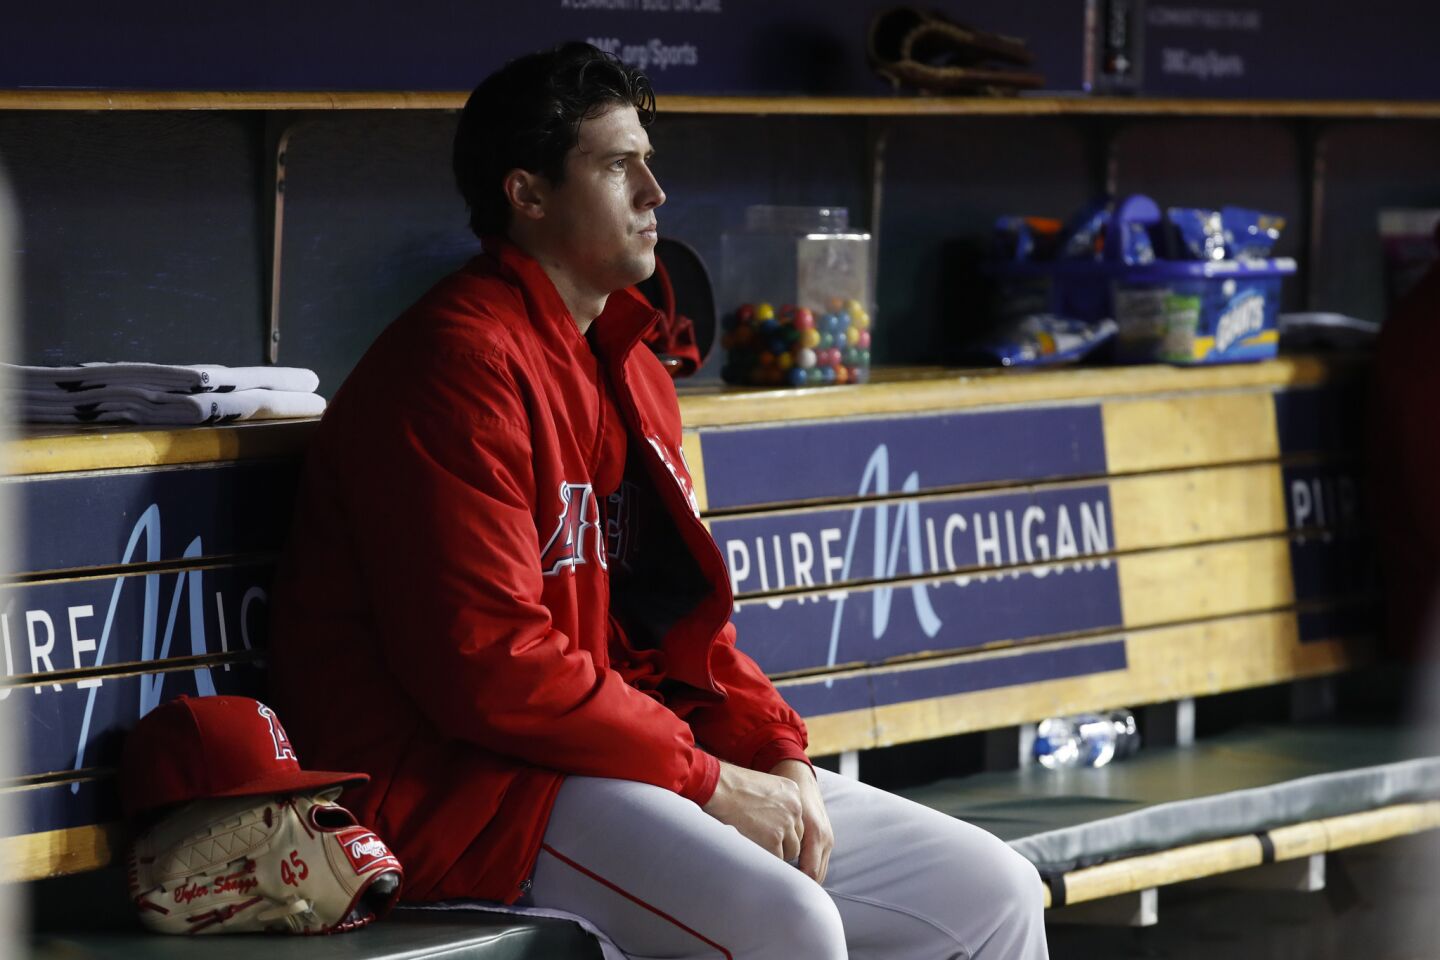 Los Angeles Angels pitcher Tyler Skaggs watches from the bench in the fifth inning of a baseball game against the Detroit Tigers in Detroit on May 8, 2019.